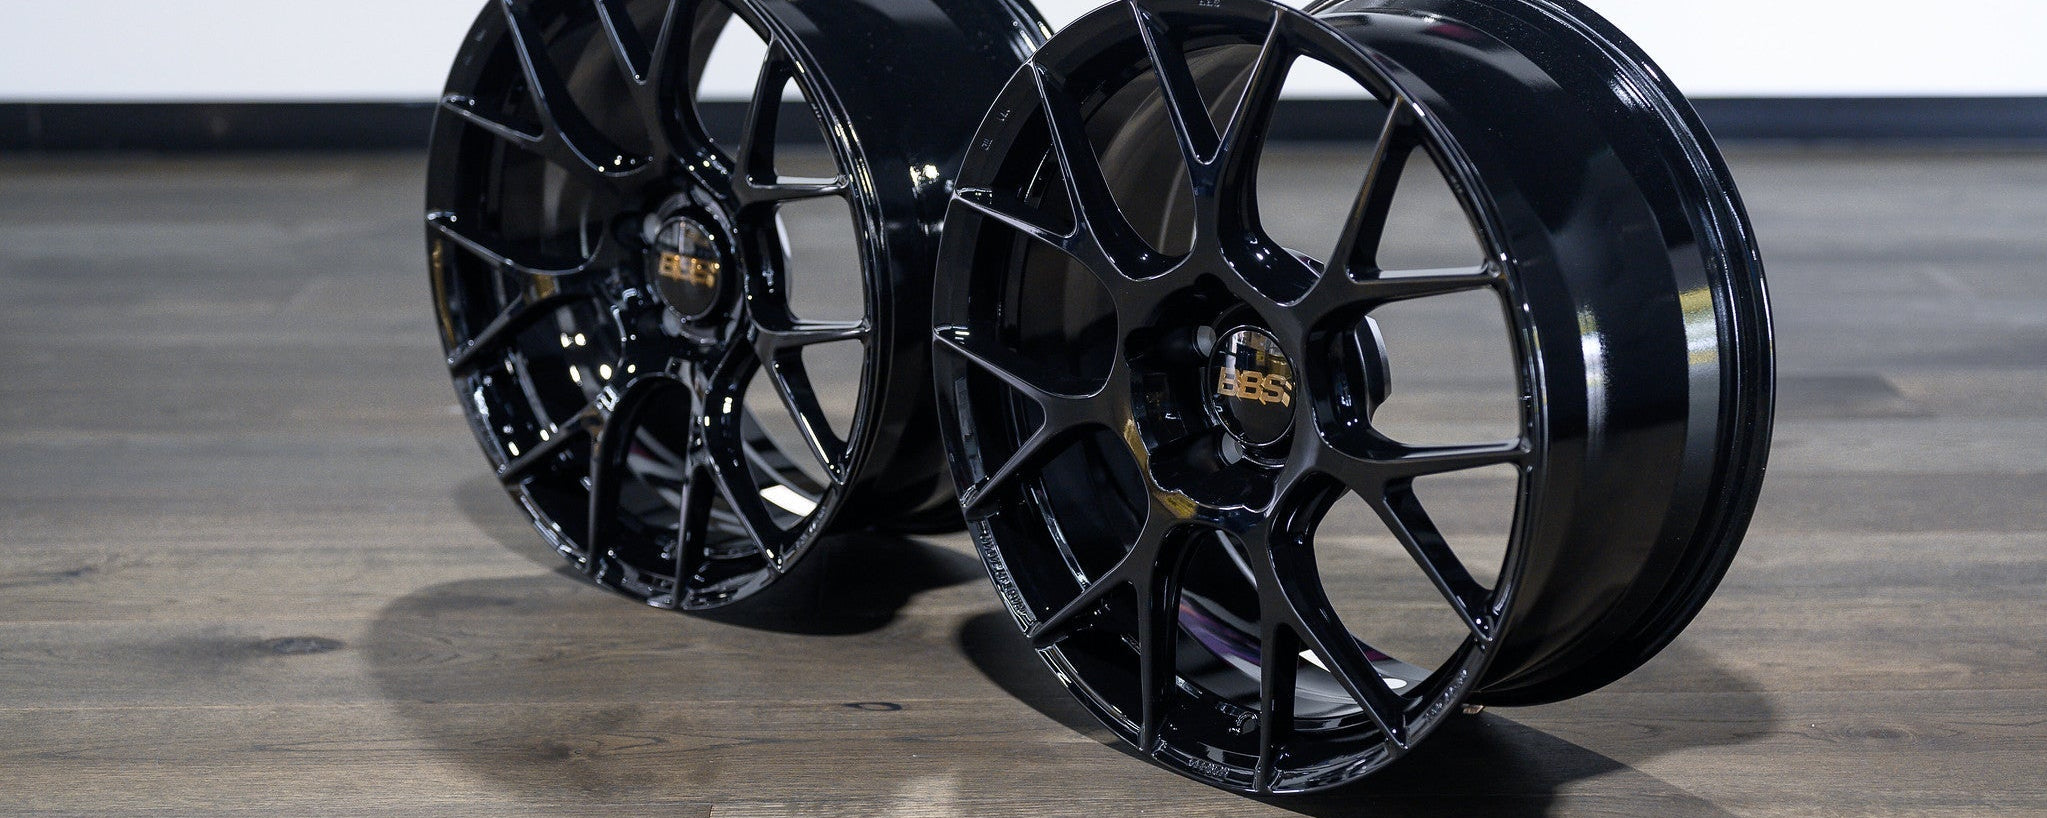 BBS RE-V7 - Premium Wheels from BBS Japan - From just $4790.00! Shop now at MK MOTORSPORTS